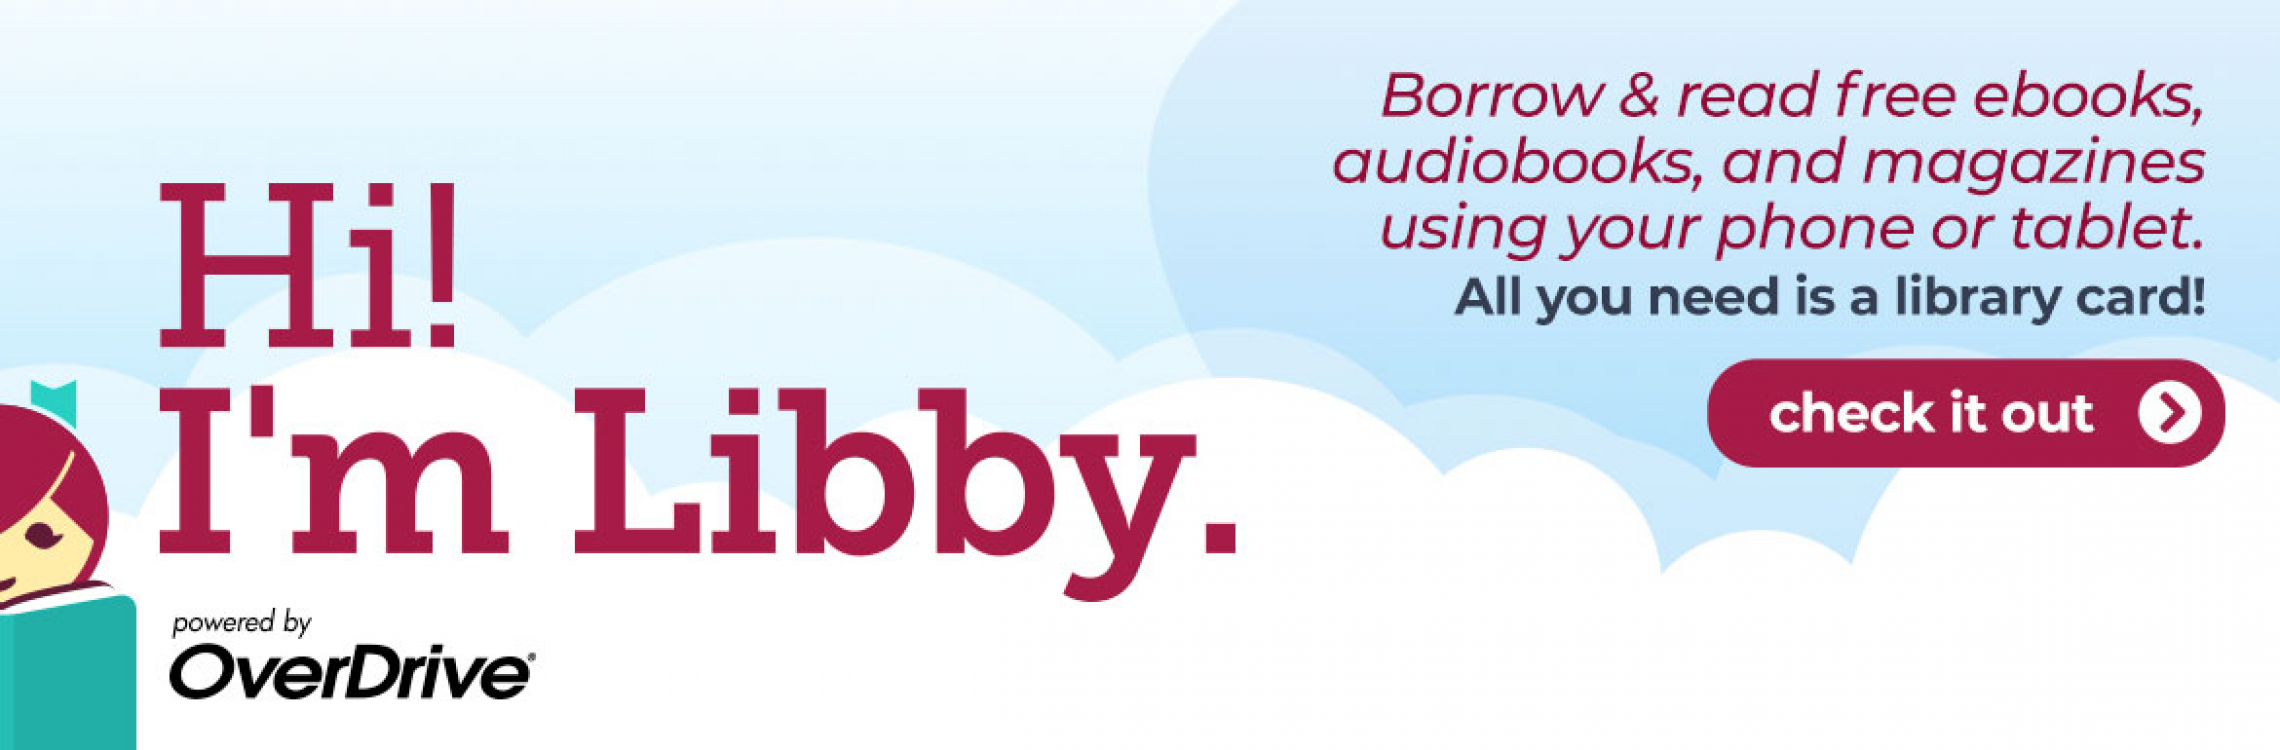 Libby graphic slide with text: "Hi! i'm Libby. Powered by OverDrive. Borrow and read free ebooks, audiobooks, and magazines using your phone or tablet. All you need is a library card! Check it out.